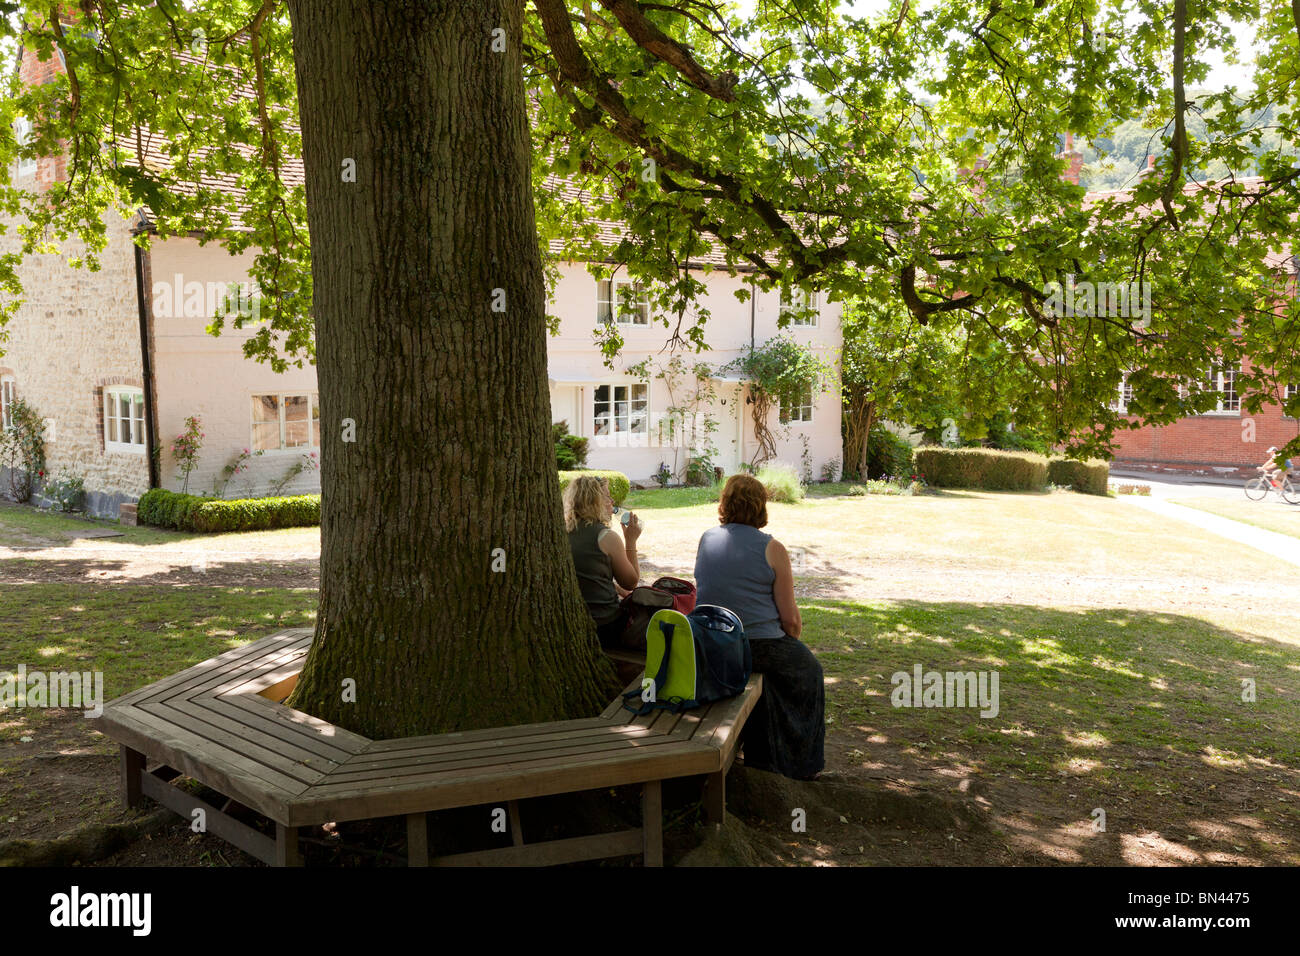 people resting on tree bench under the shade of an oak tree in Selborne outside the church Stock Photo